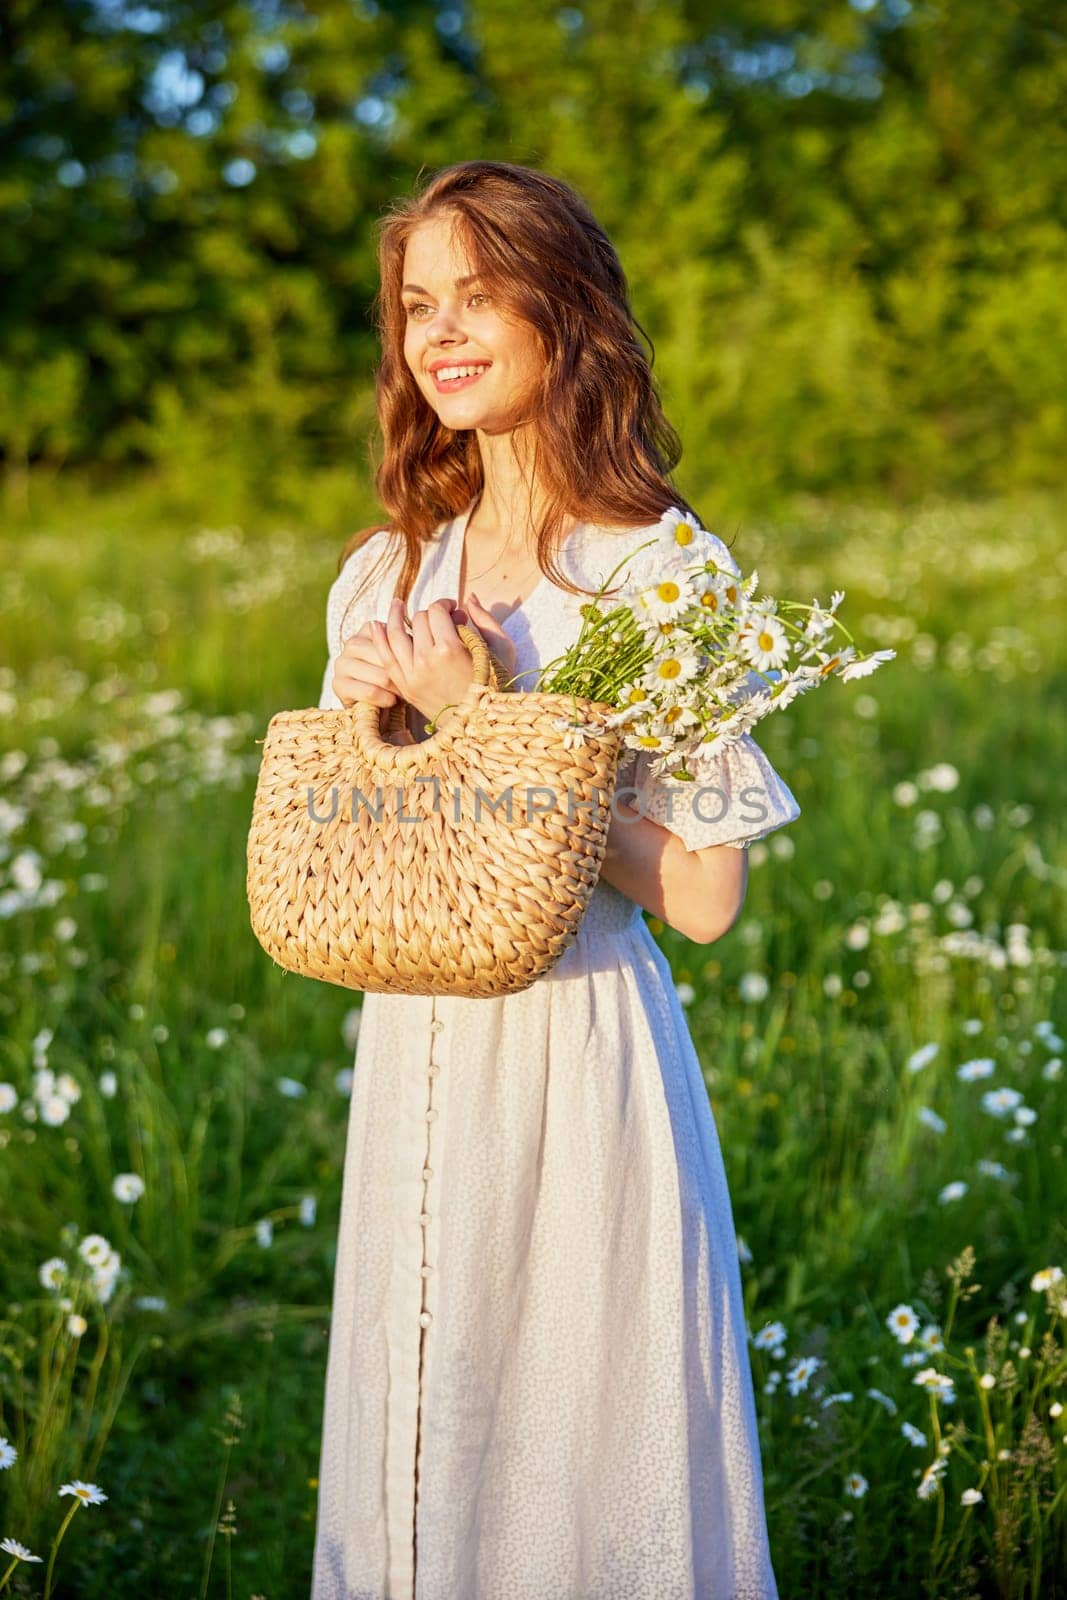 beautiful woman laughing in nature in a chamomile field holding a wicker basket in her hands. High quality photo